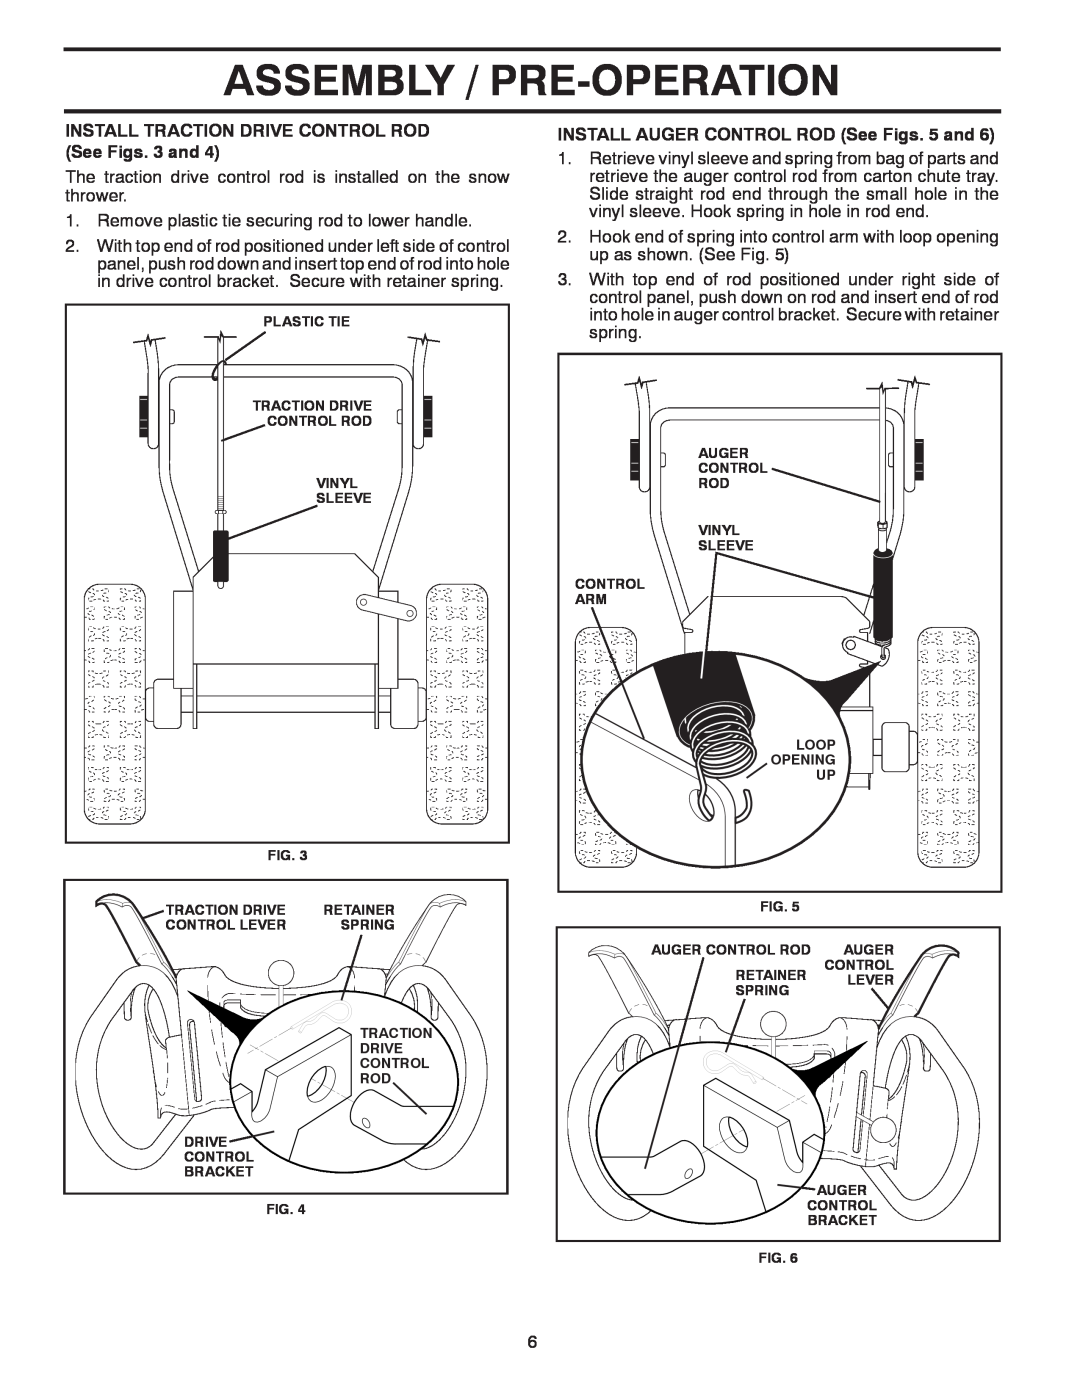 Poulan 428556 owner manual Assembly / Pre-Operation, INSTALL TRACTION DRIVE CONTROL ROD See Figs. 3 and 